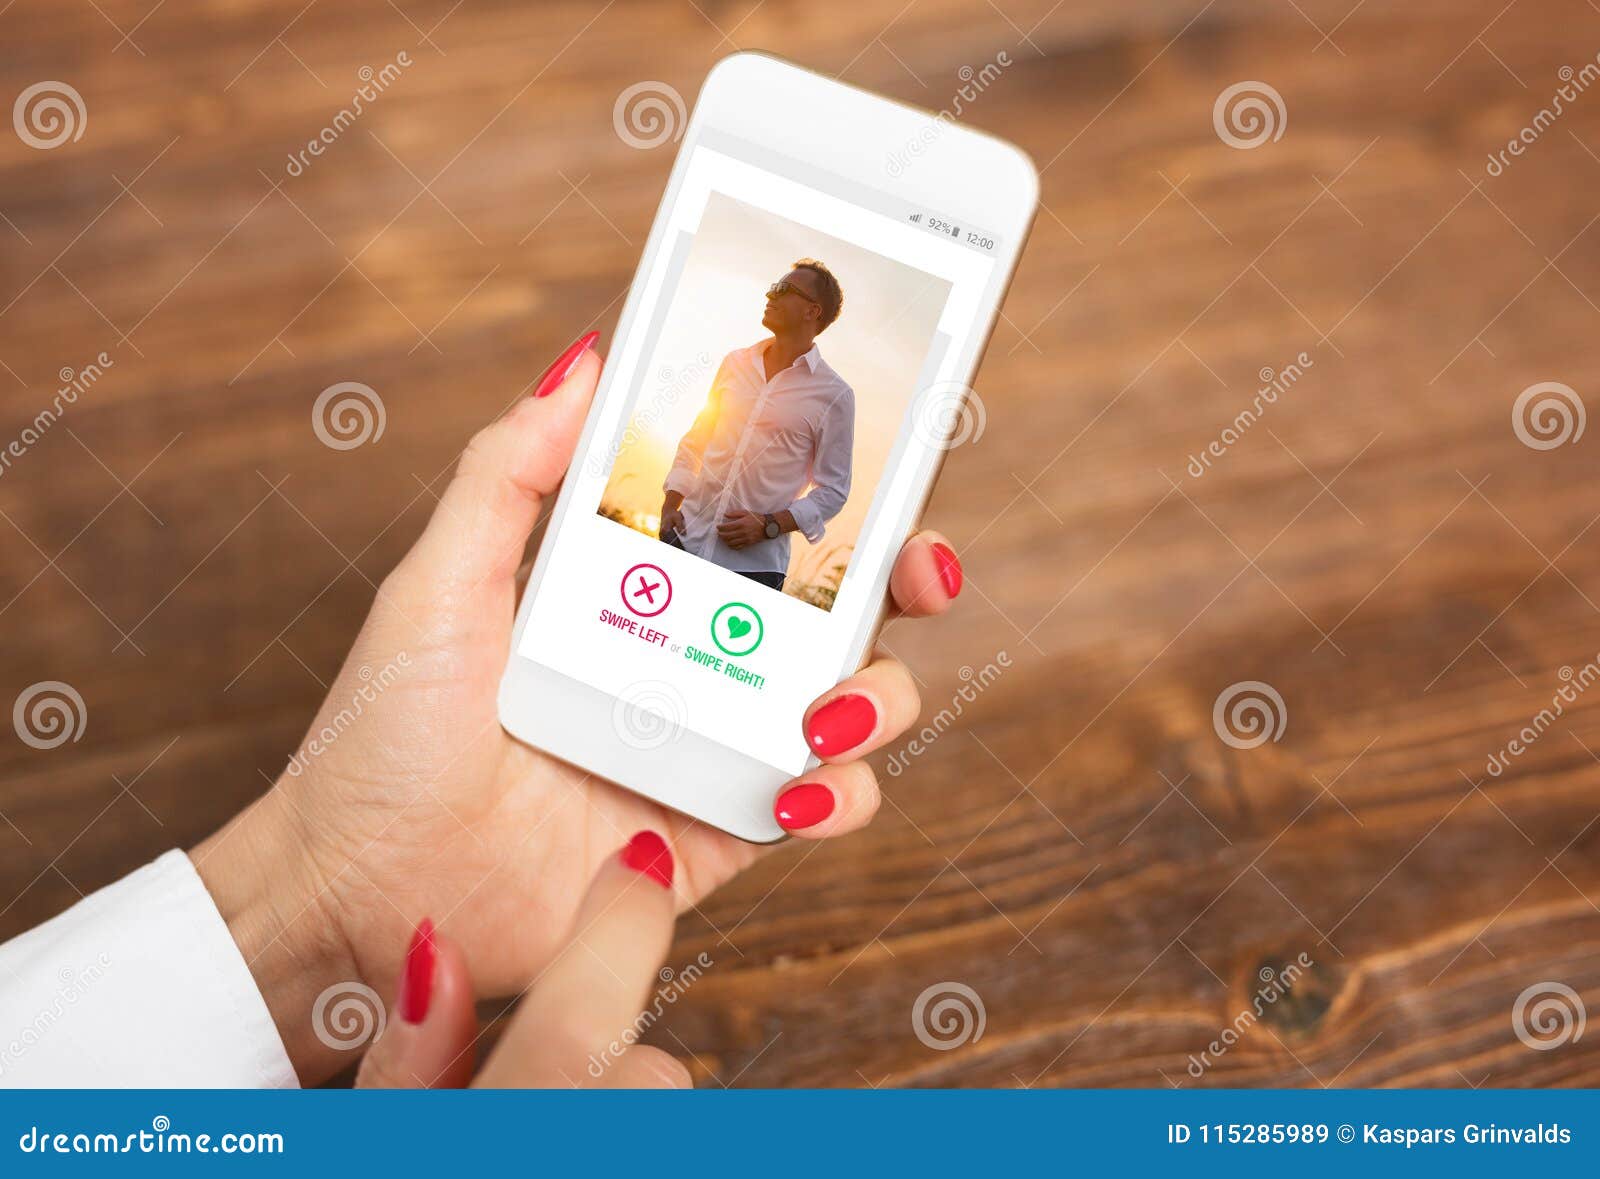 woman using dating app and swiping user photos